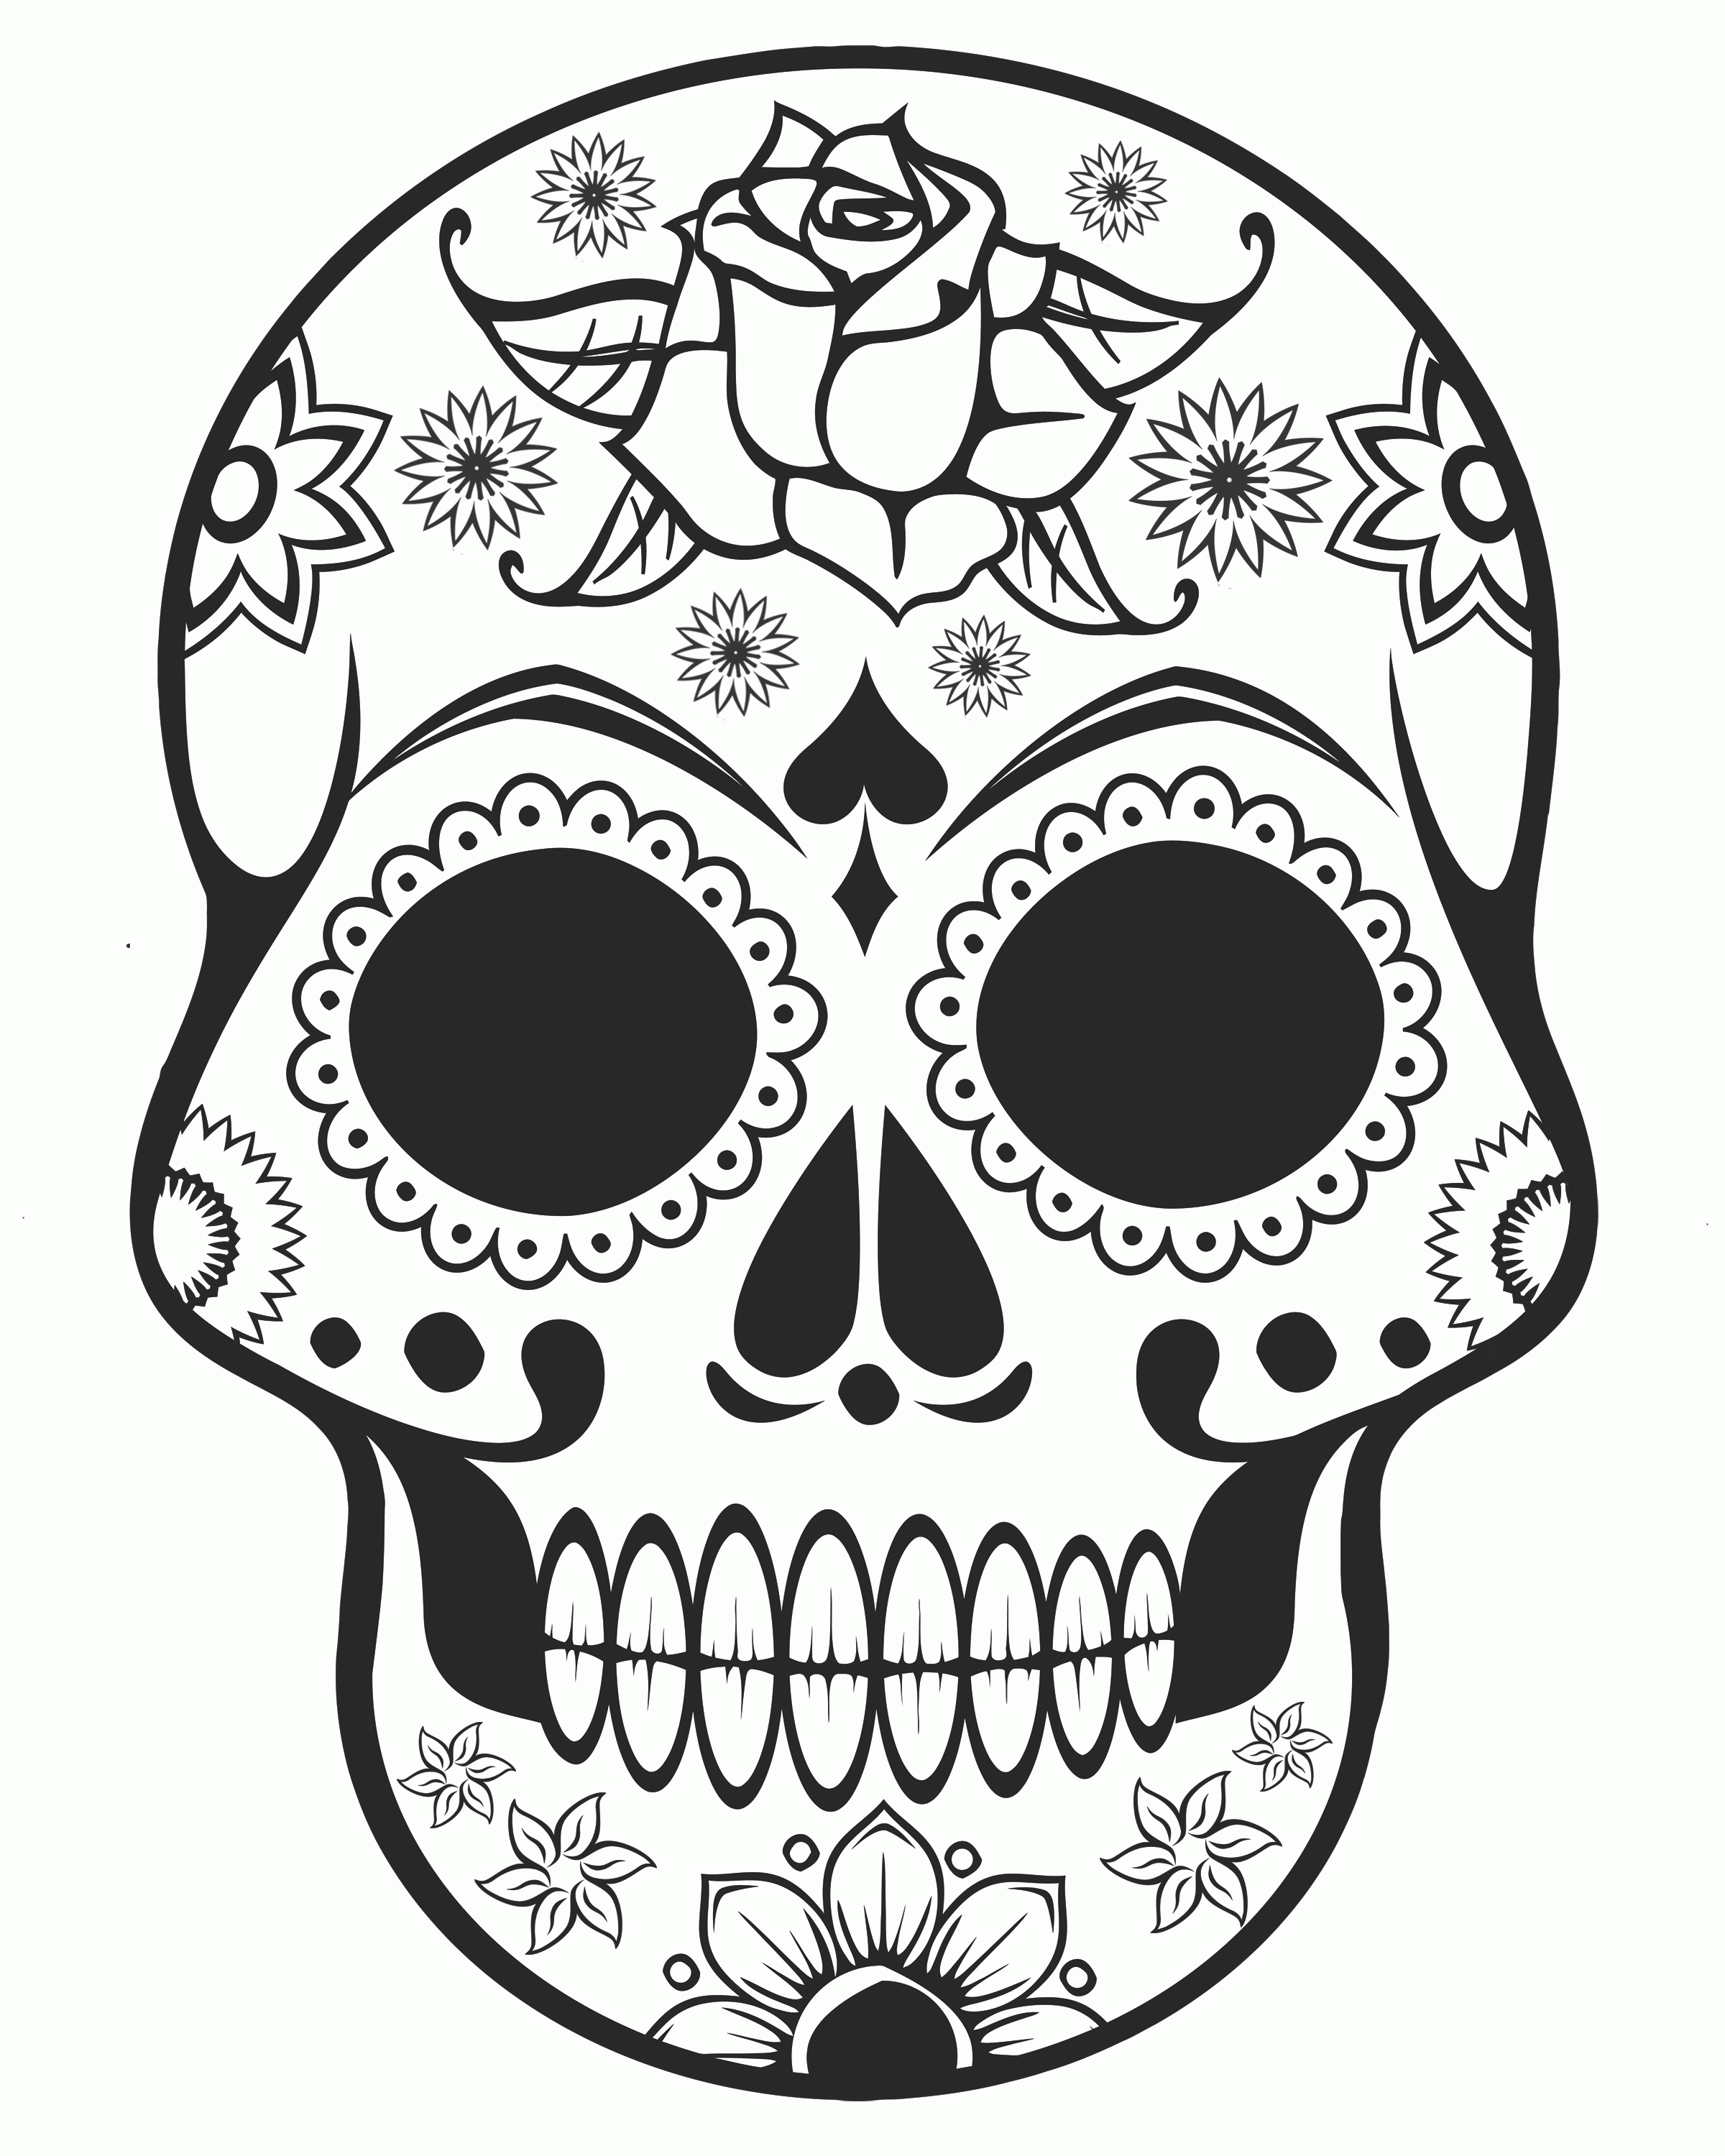 Halloween Skull Coloring Pages Skull Coloring Pages Sugar Skull ...